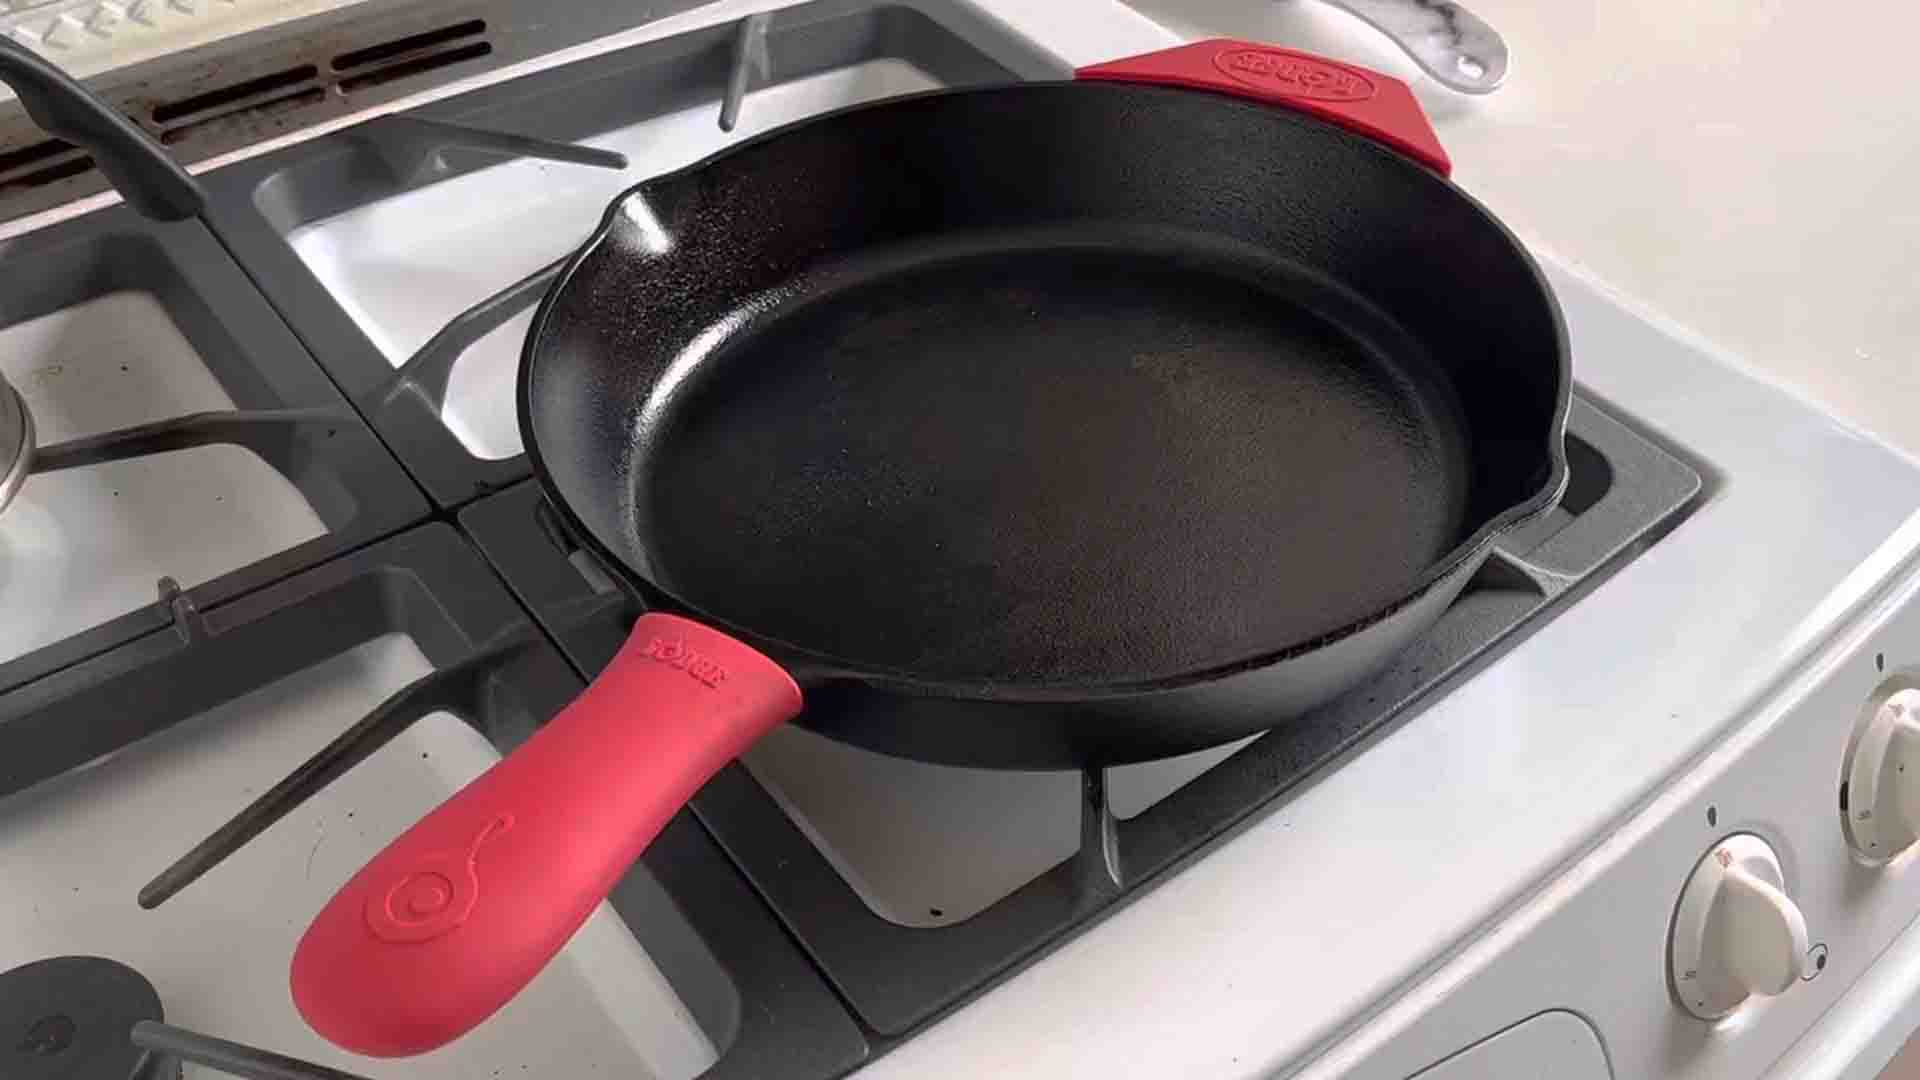 WHAT IS THE BEST POOTS AND PANS FOR GAS STOVE